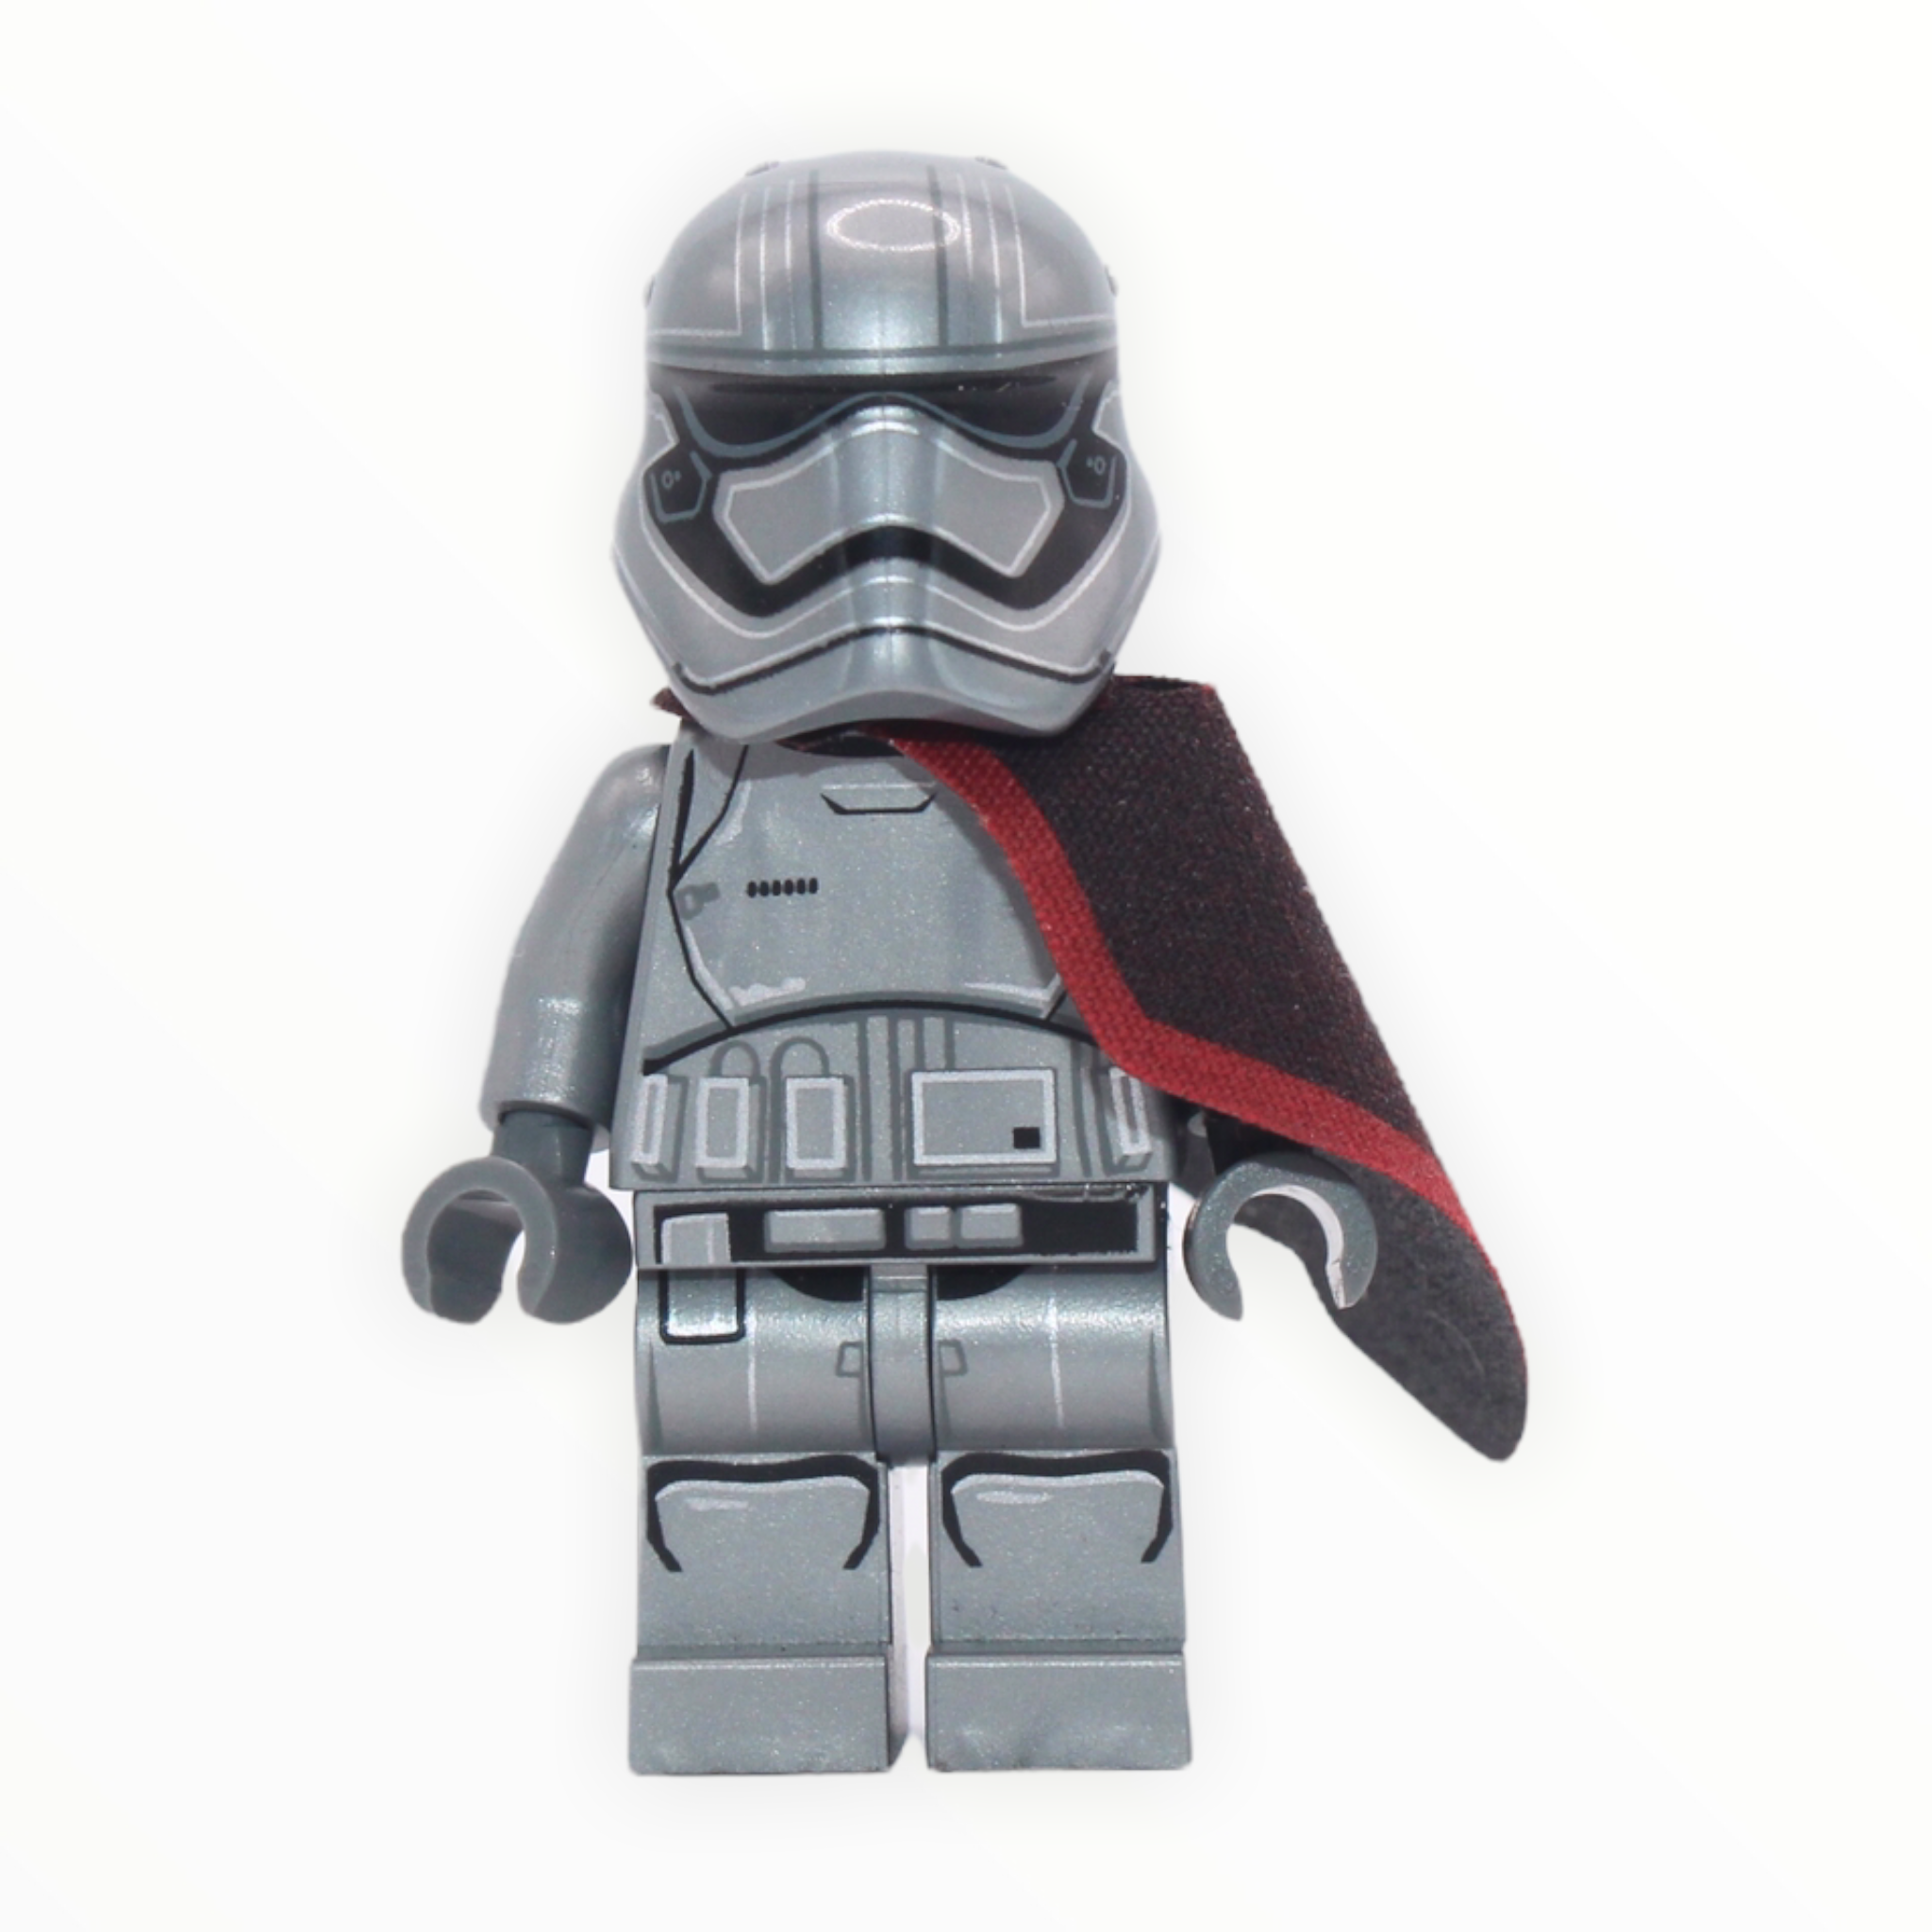 Captain Phasma (rounded-mouth pattern)